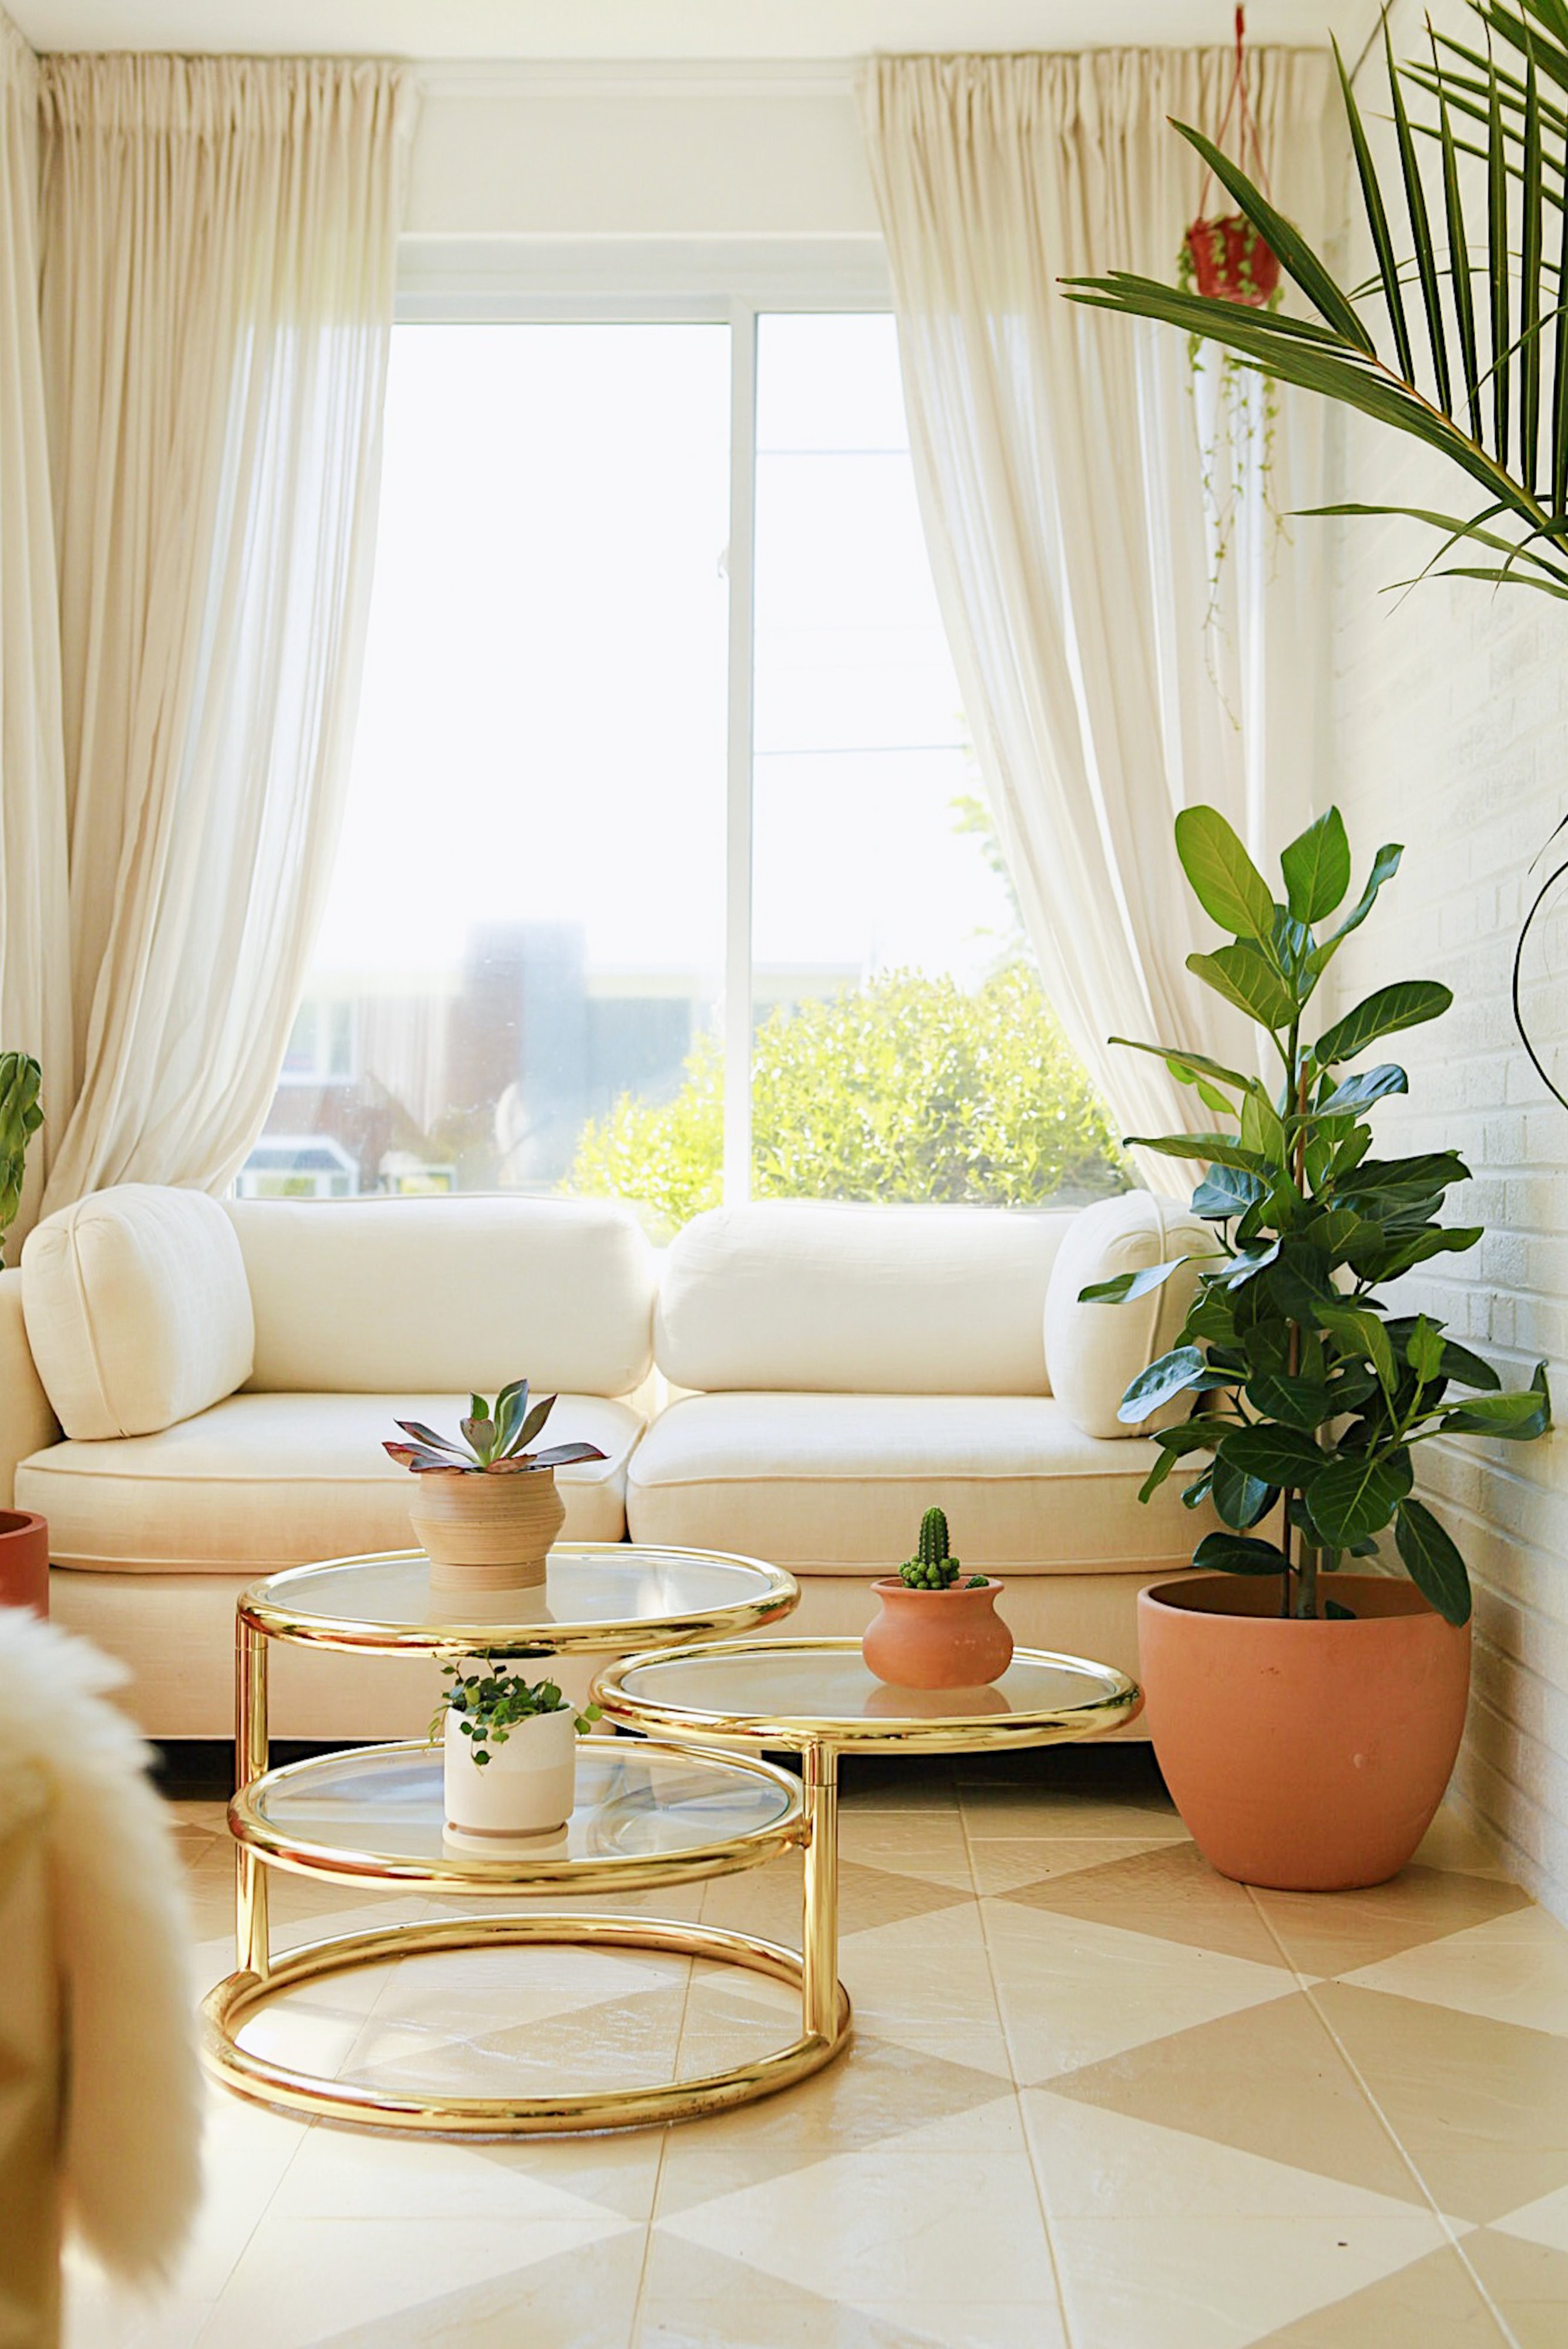 This Online Interior Design Community Offers Crowdsourced Advice